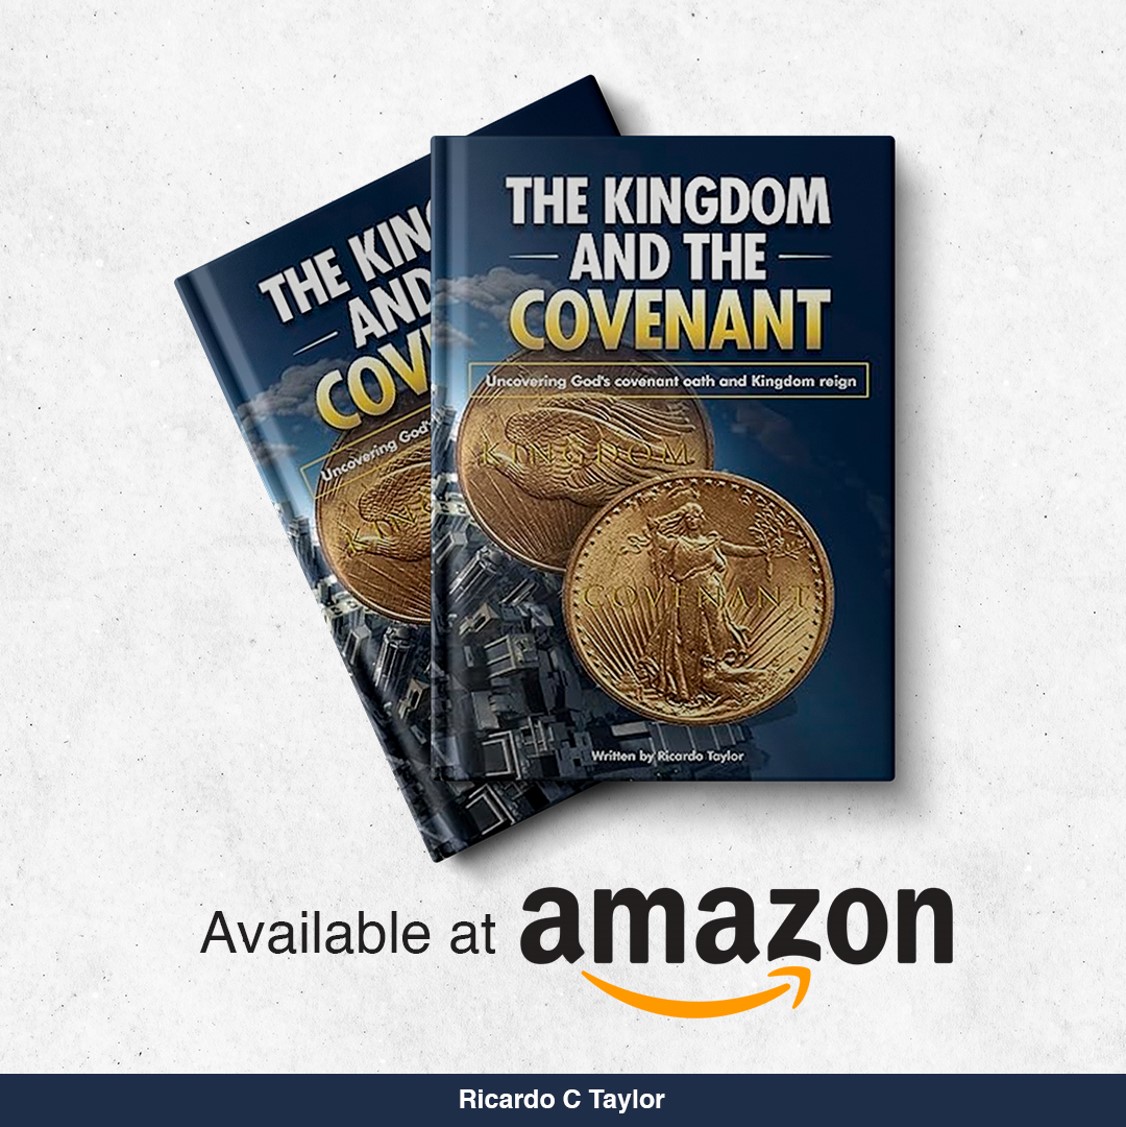 Let's disclose the secrets behind God's kingdom reign and His covenant oath. 

Swoop into a journey of discovery with my book, 'The Kingdom and the Covenant.' 

Order your copy now - amzn.to/3TtAJyA

#KingdomReign #CovenantOath #NewRelease